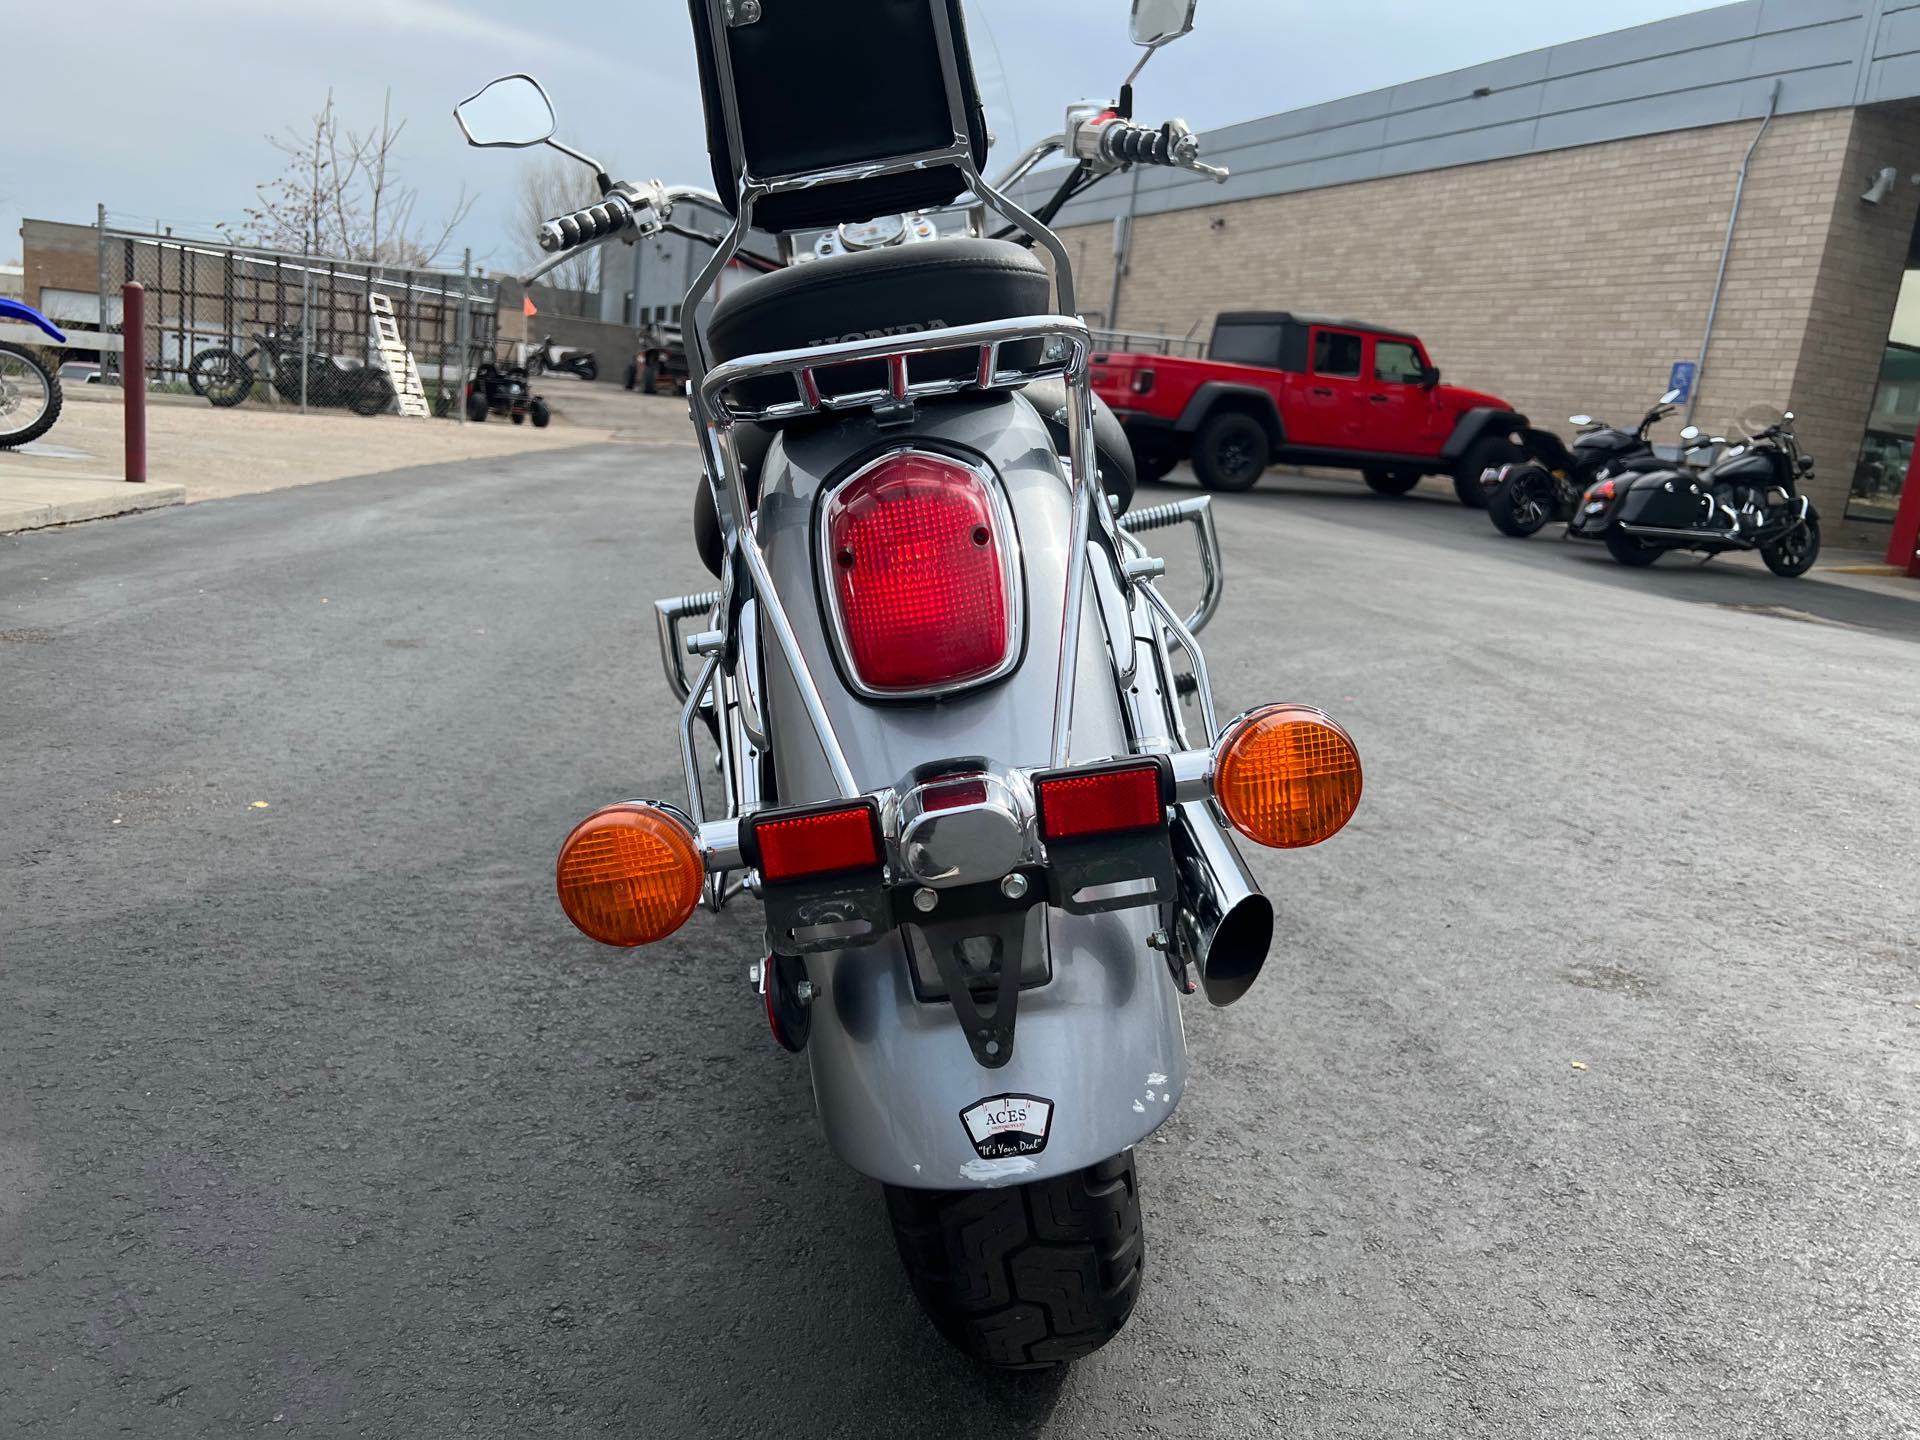 2001 HONDA VT750 at Aces Motorcycles - Fort Collins